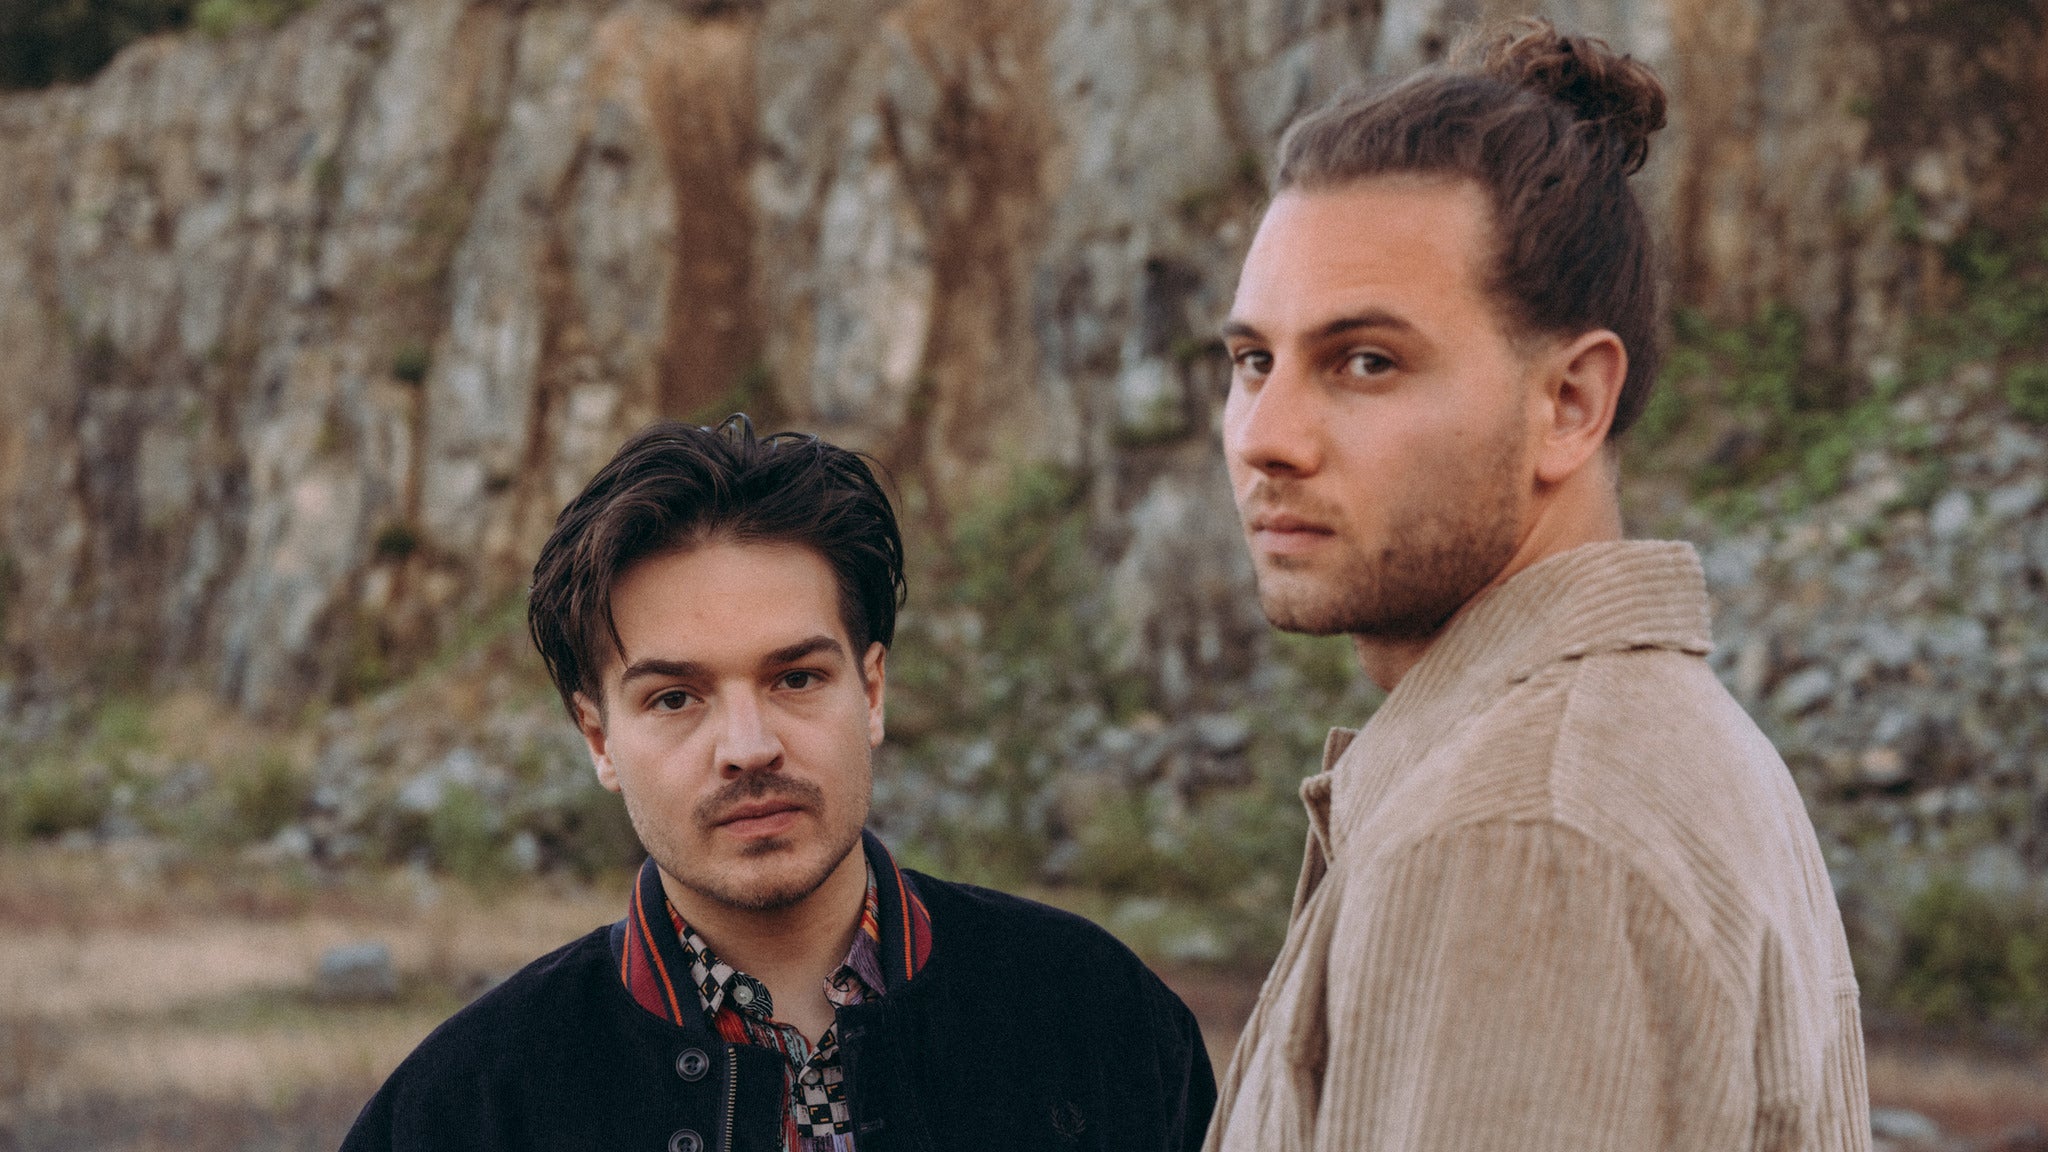 MILKY CHANCE: BLOSSOM TOUR in St Louis promo photo for Citi Cardmembers presale offer code